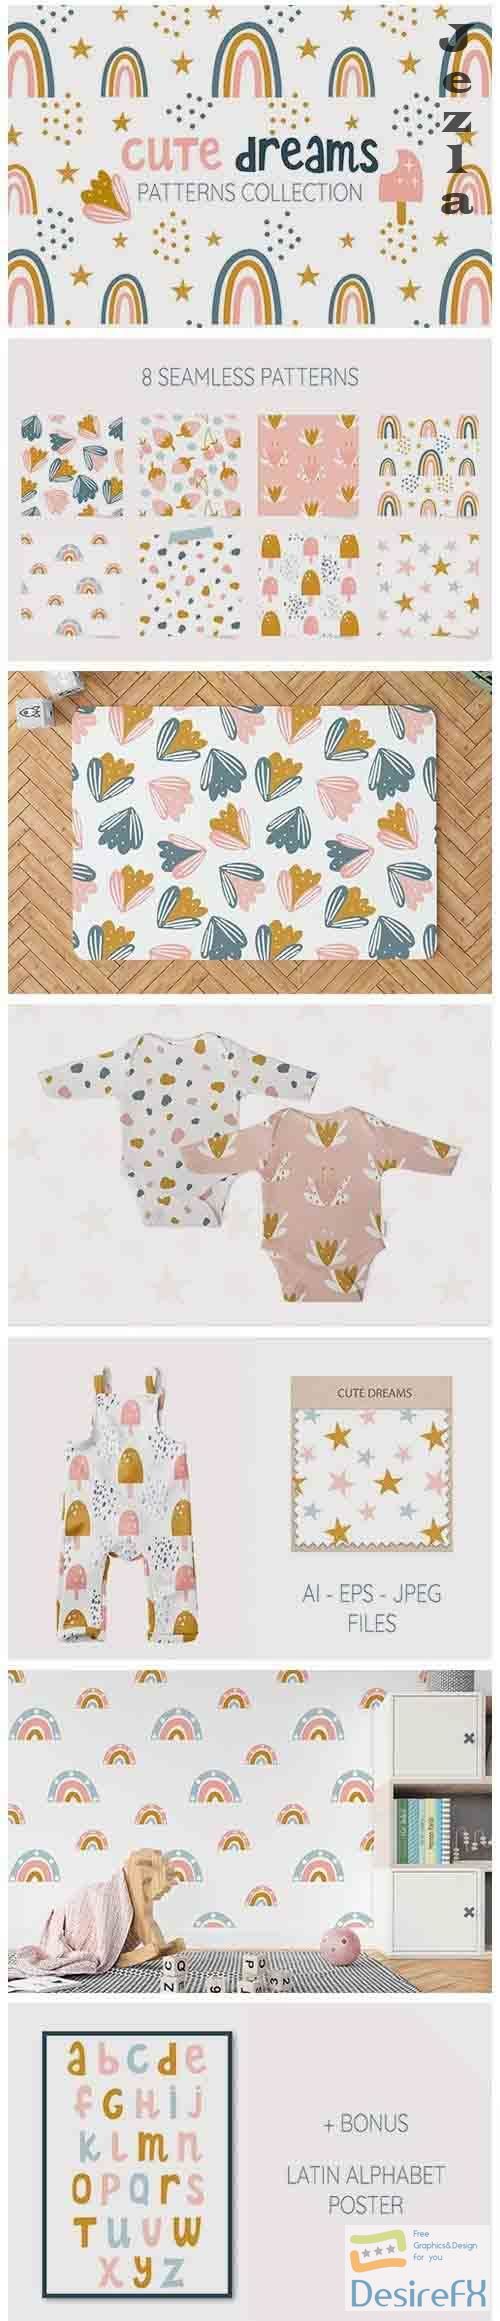 Cute Dreams. Patterns for kids - 4839830